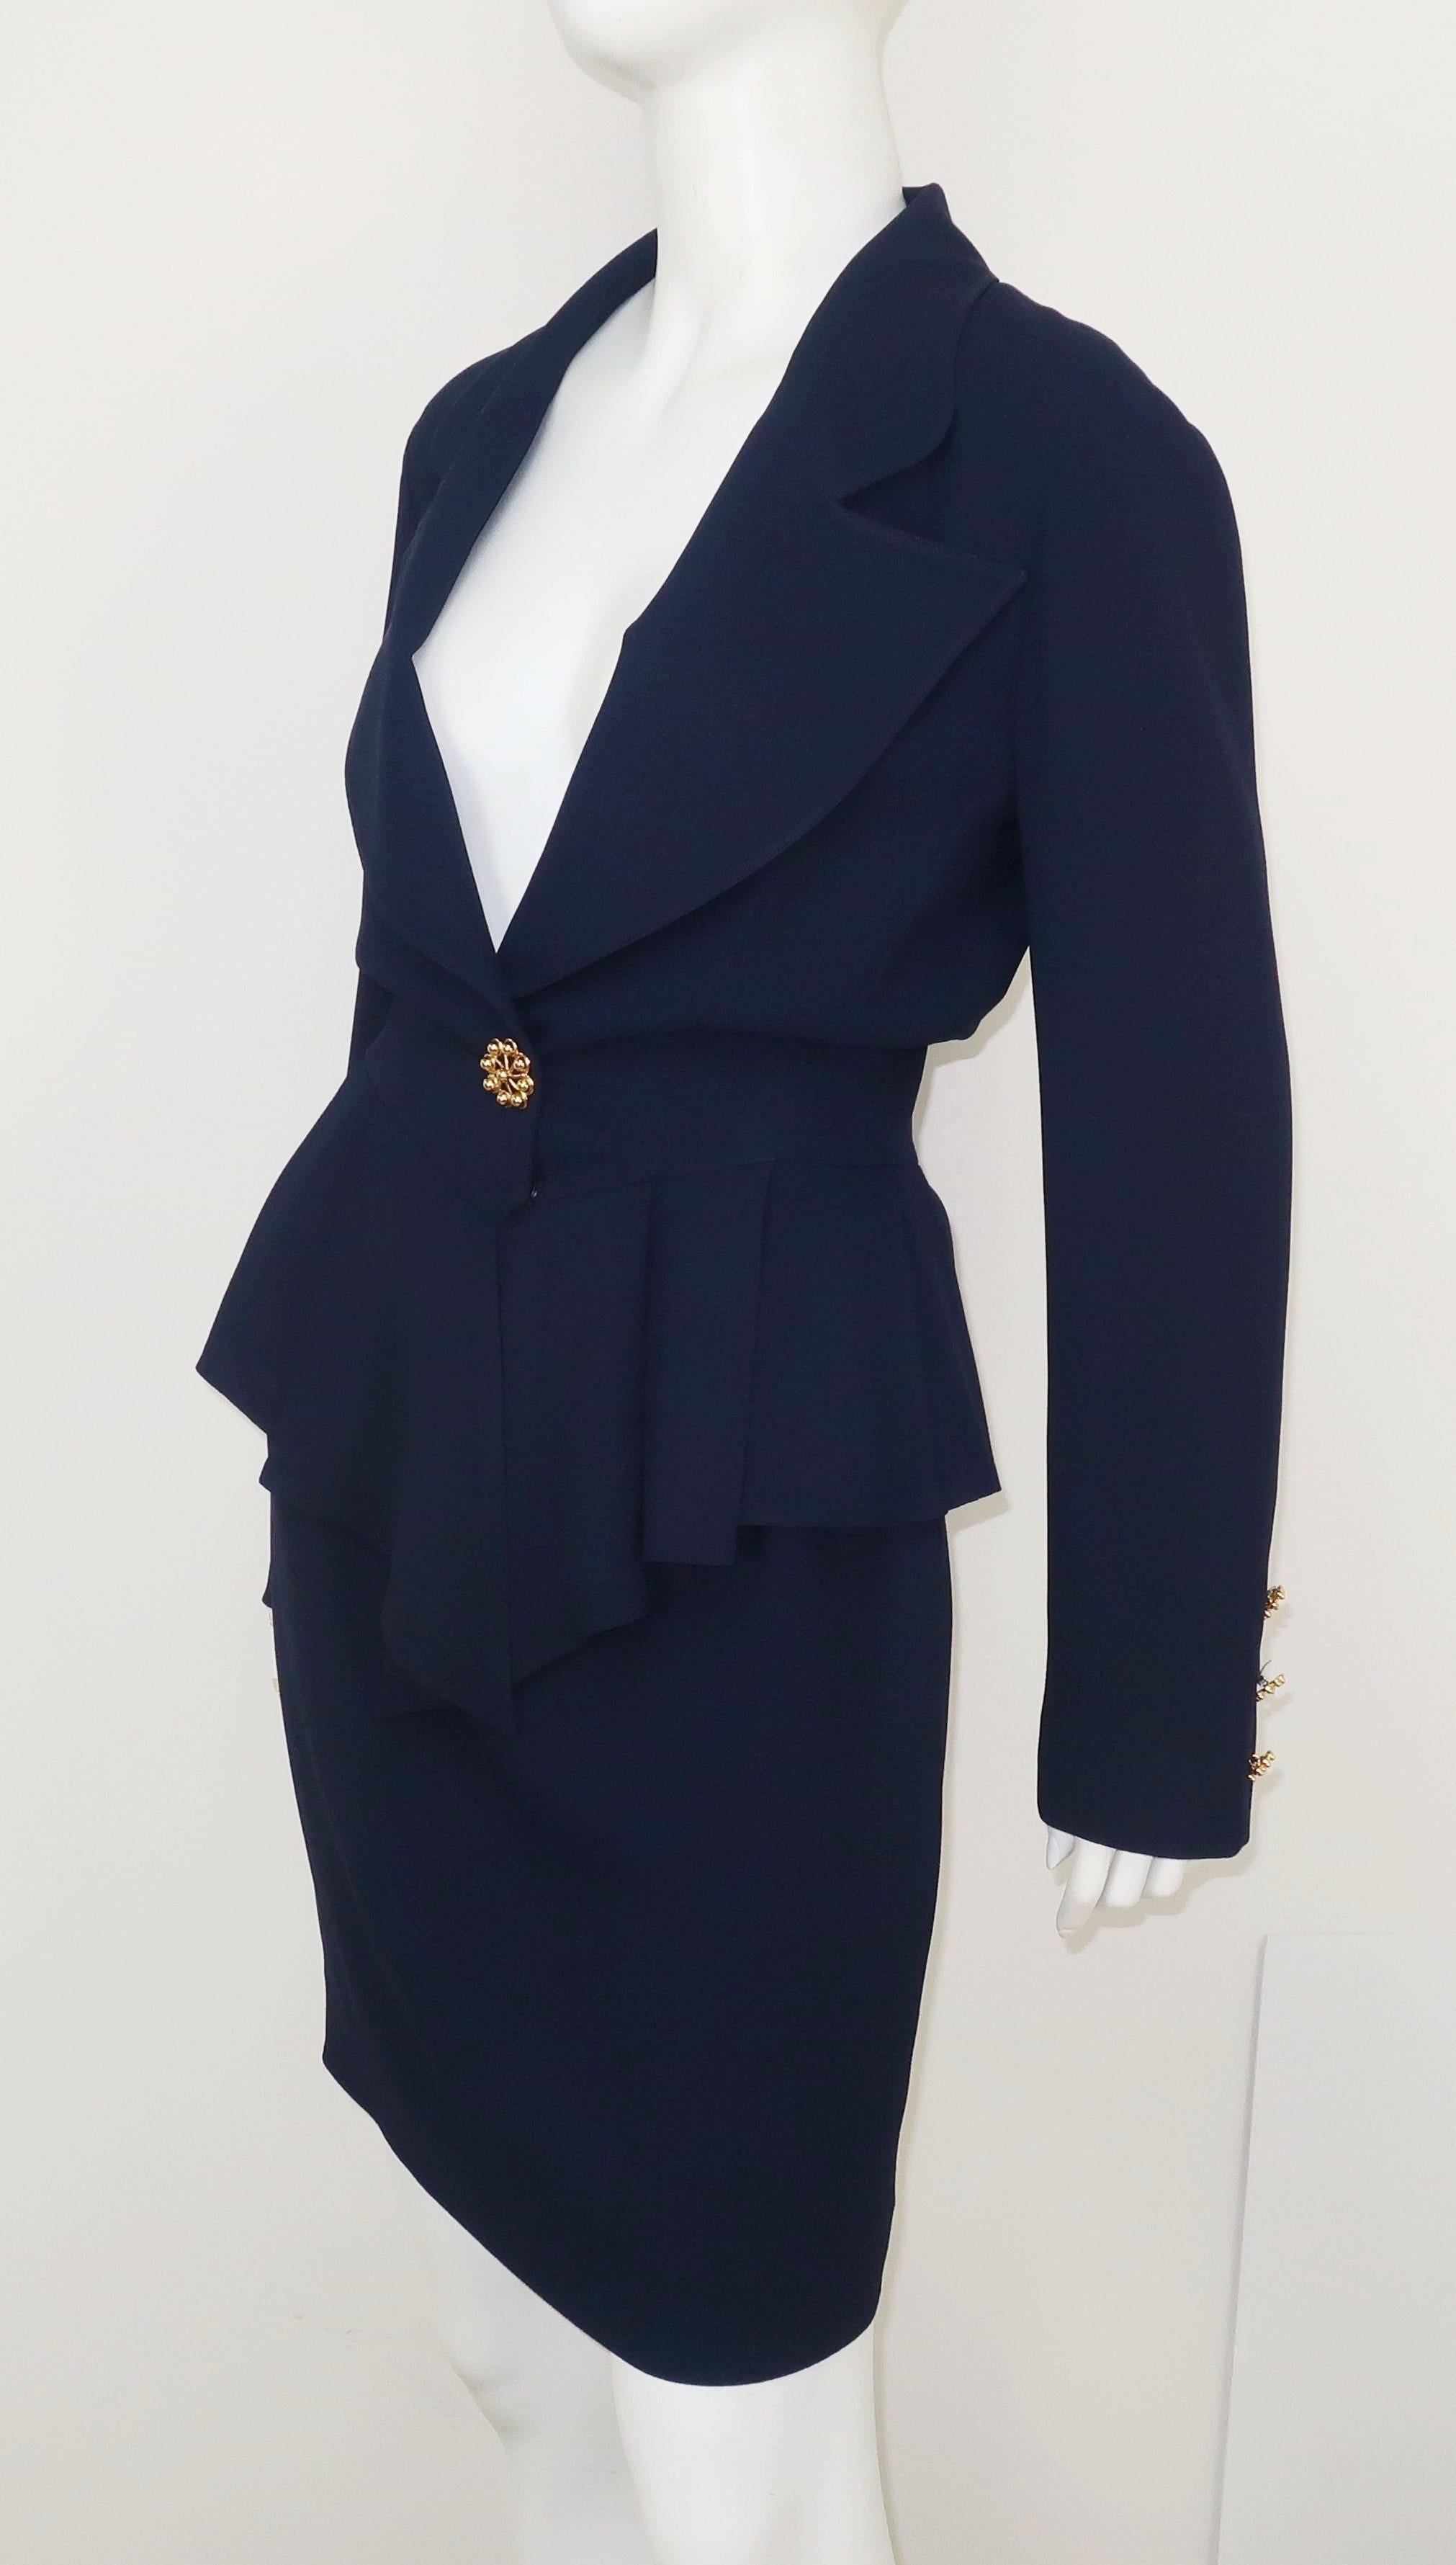 C.1990 Karl Lagerfeld design that combines a feminine peplum silhouette with a classic skirt suit style.  Created with an all season navy blue crepe fabric and accented by eye catching starburst gold buttons at the cuffs and waist.  The jacket